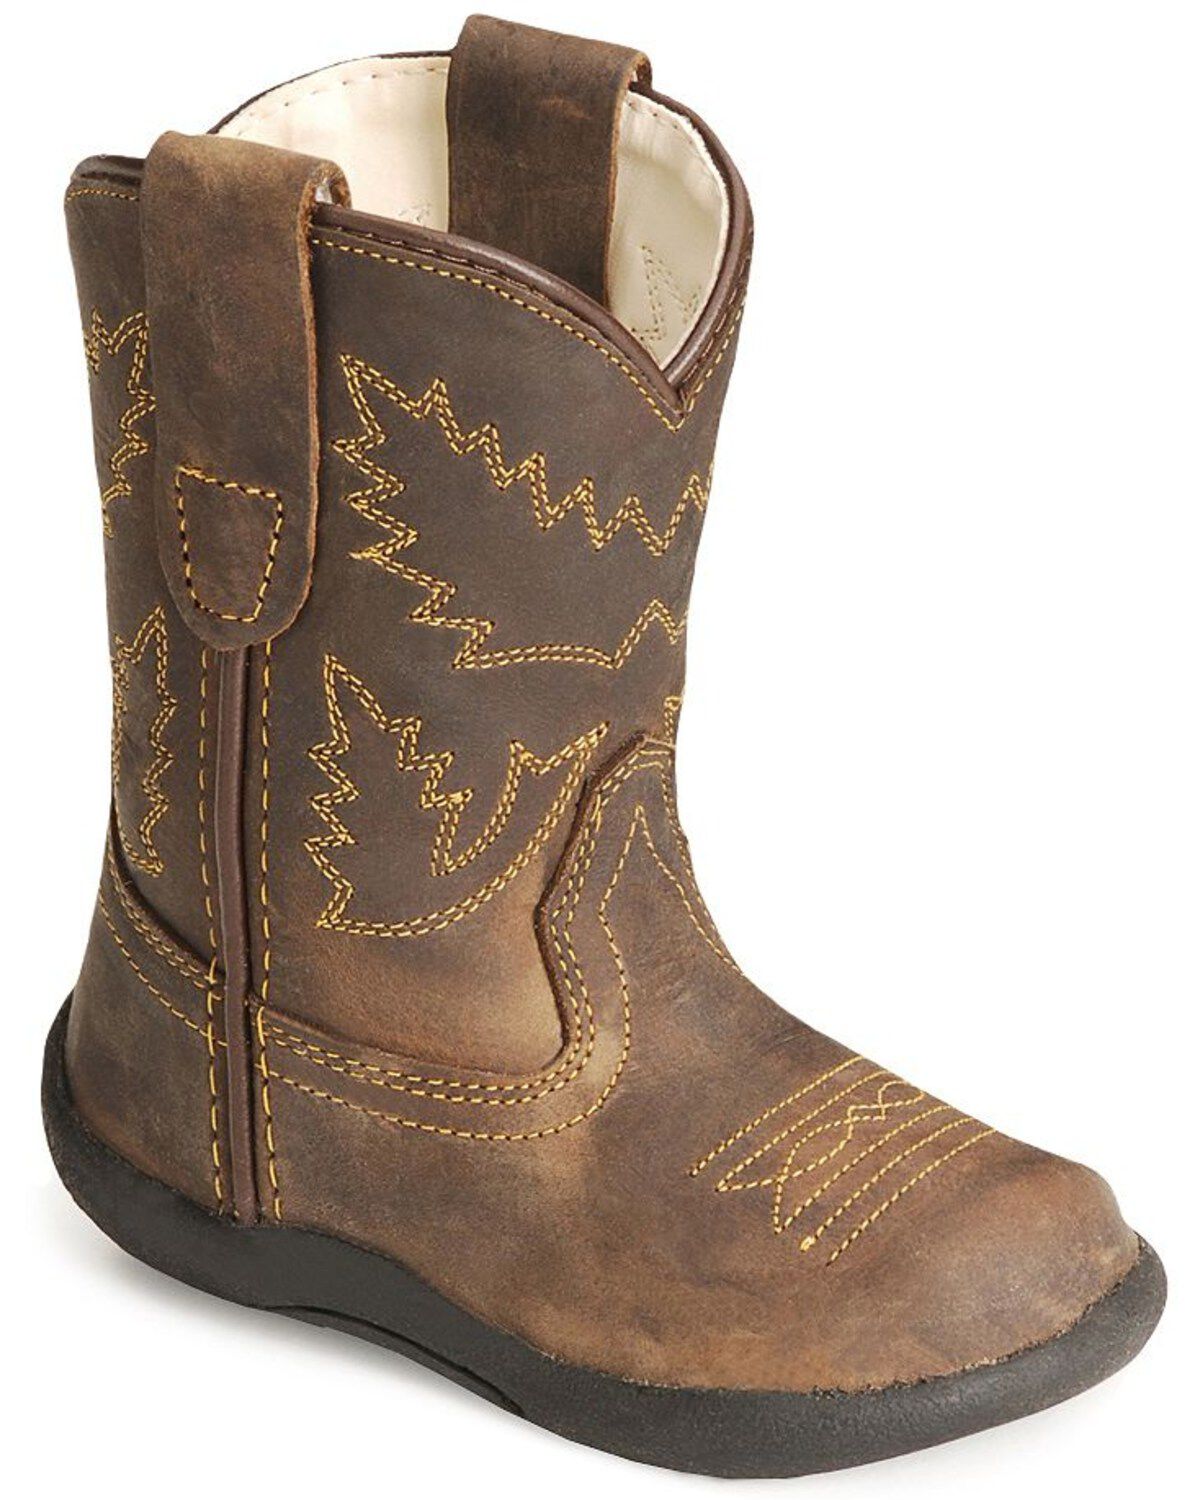 Kids' Old West Boots - Boot Barn